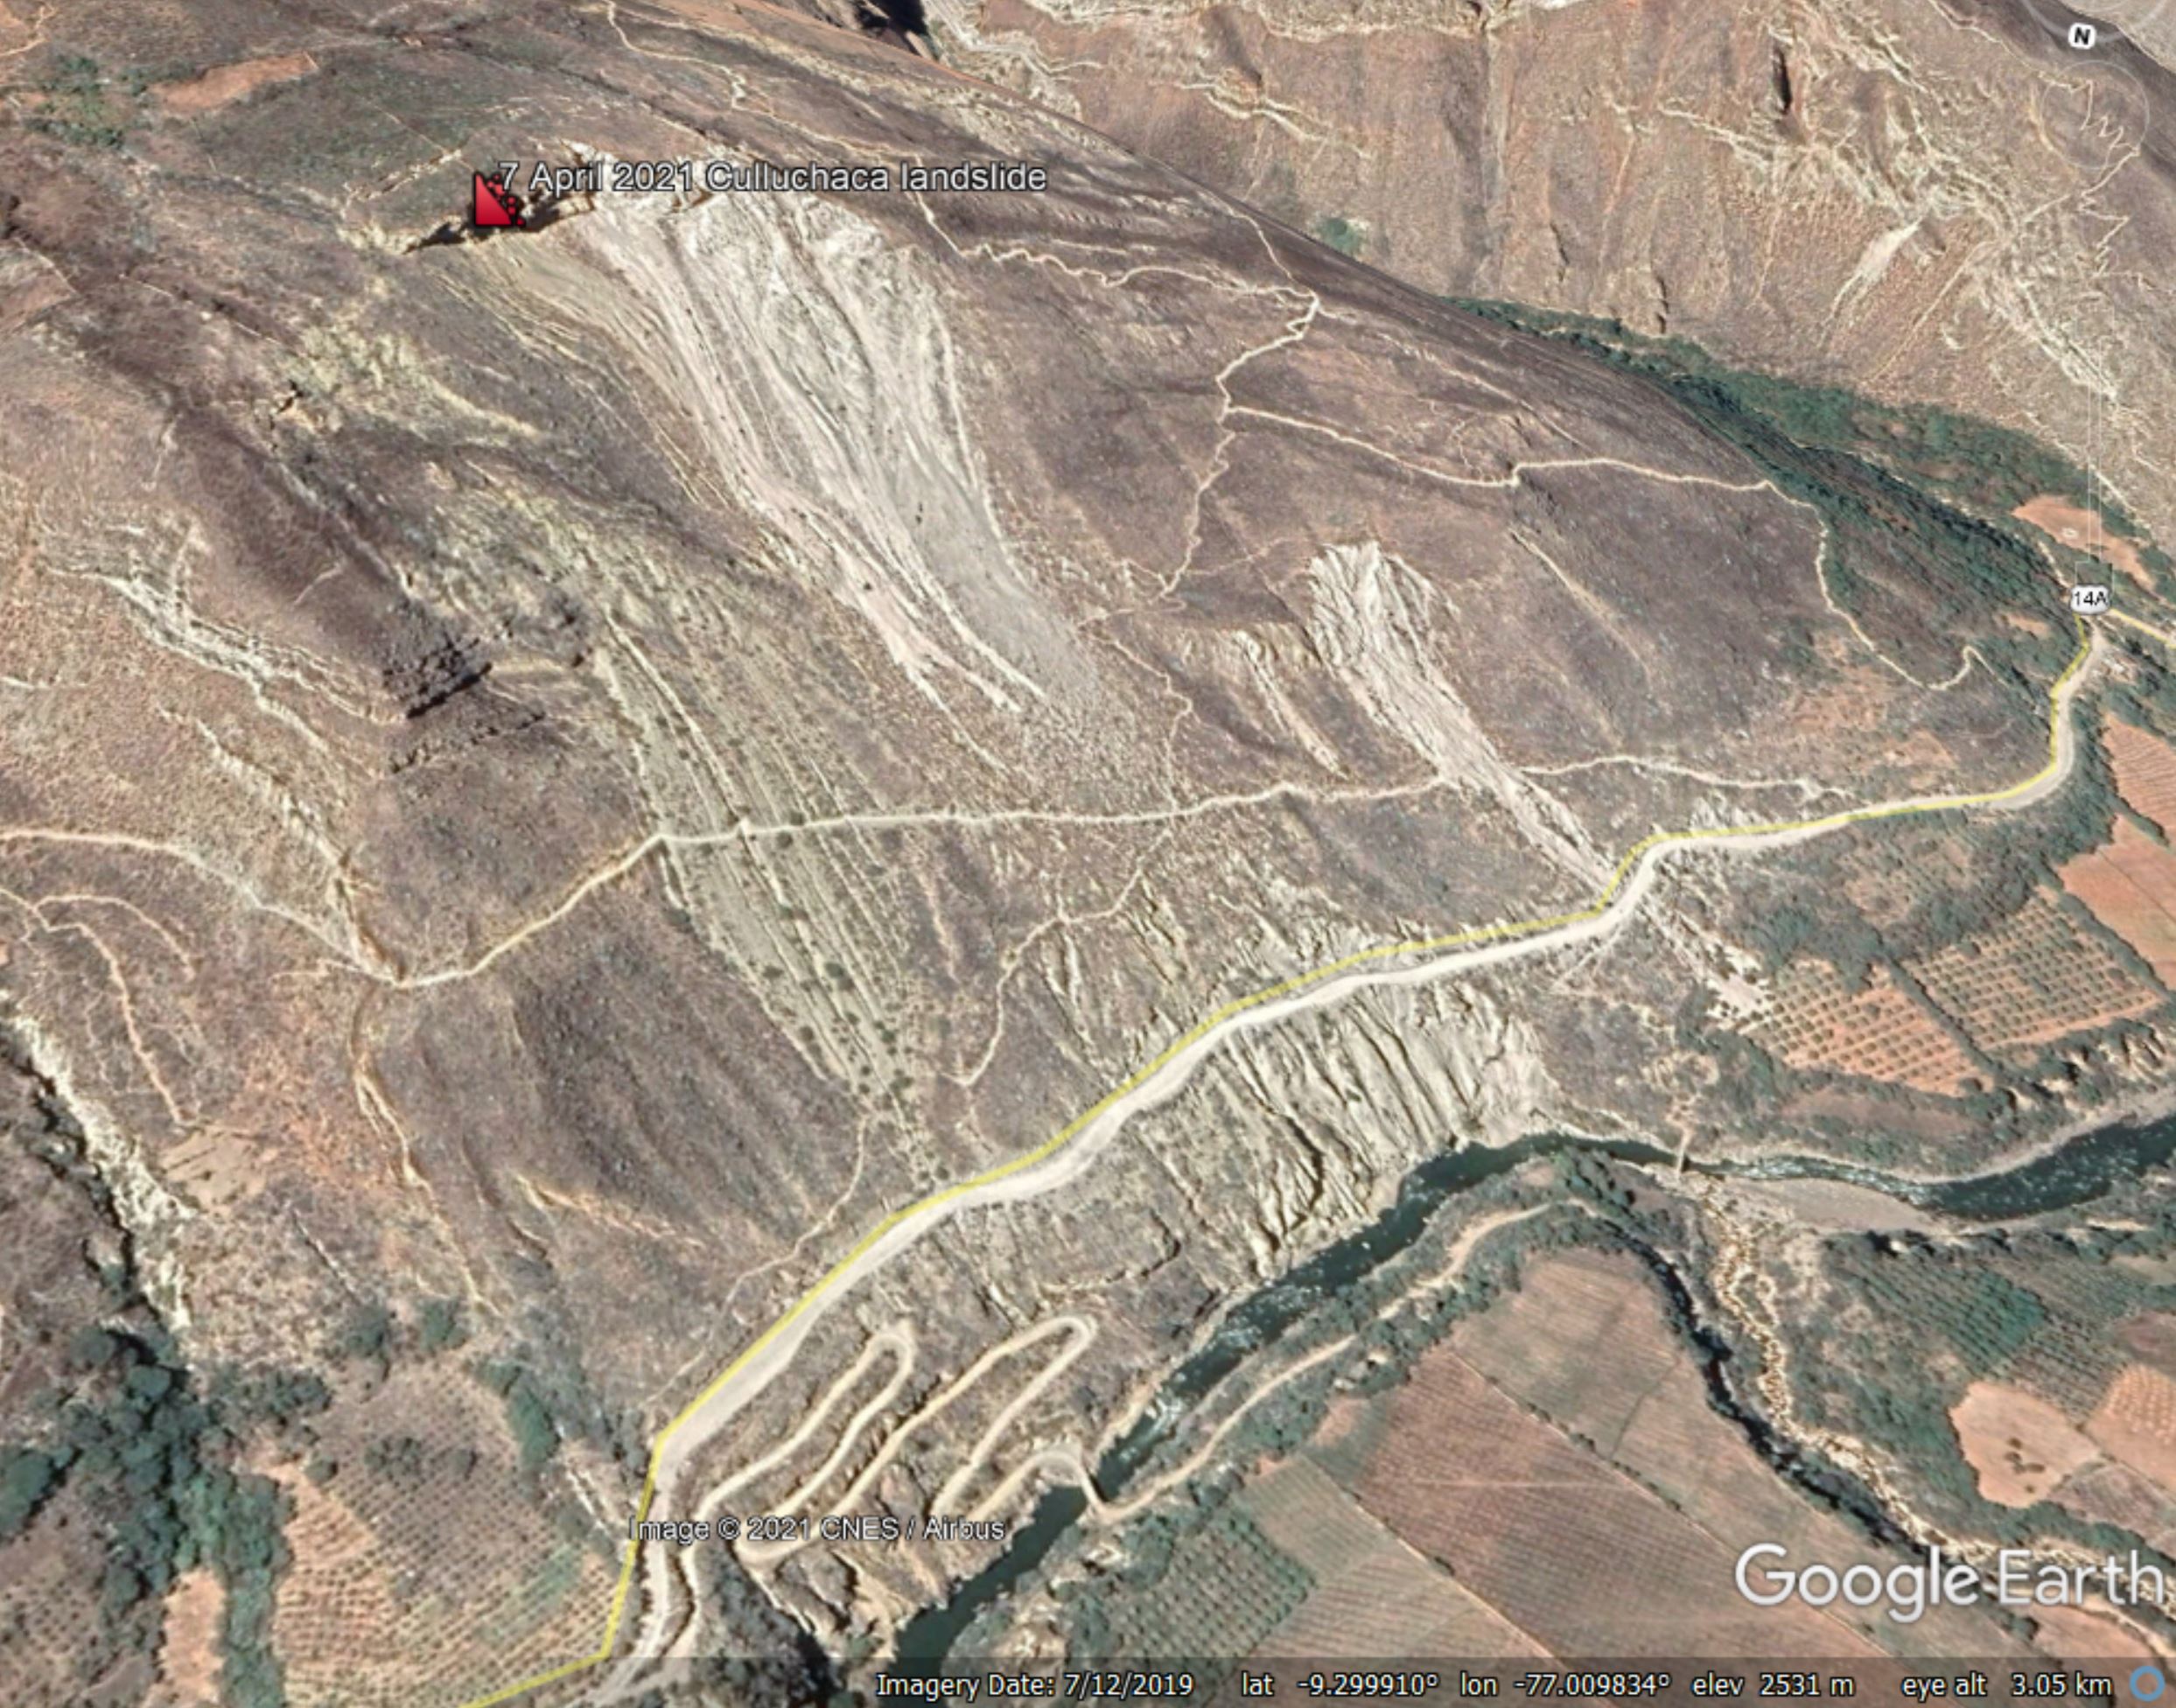 Google Earth view of the site of the landslide close to Culluchaca in Peru.